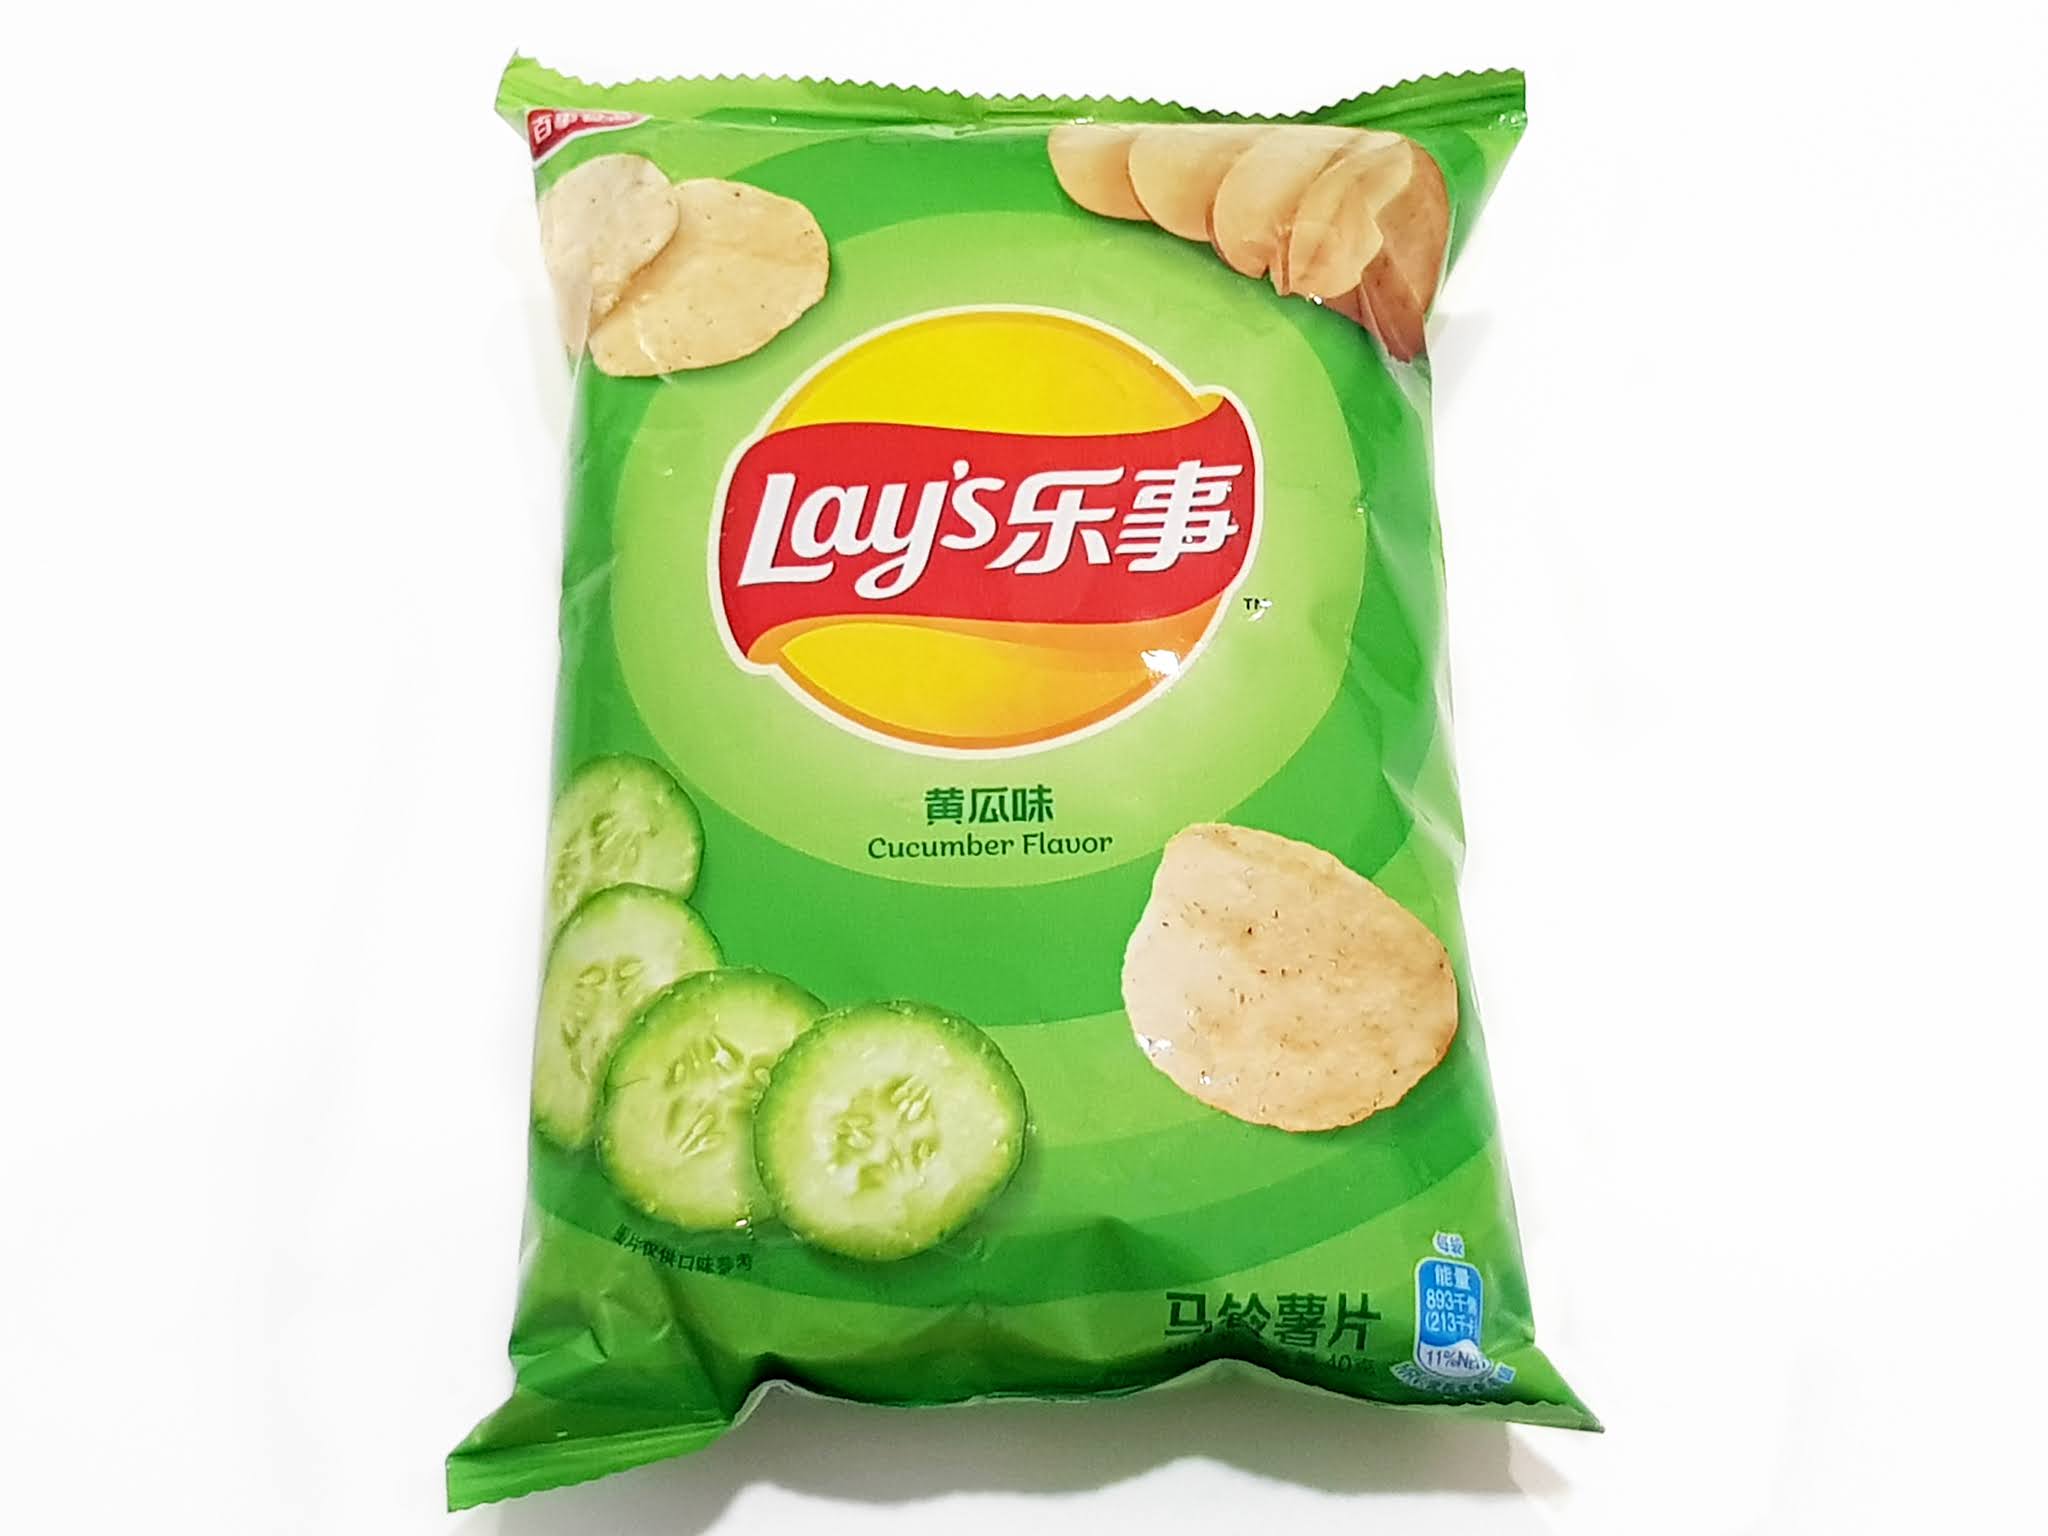 [Review] Lay's Potato Chips Cucumber Flavor 乐事黄瓜味 - Just An Ordinary Girl